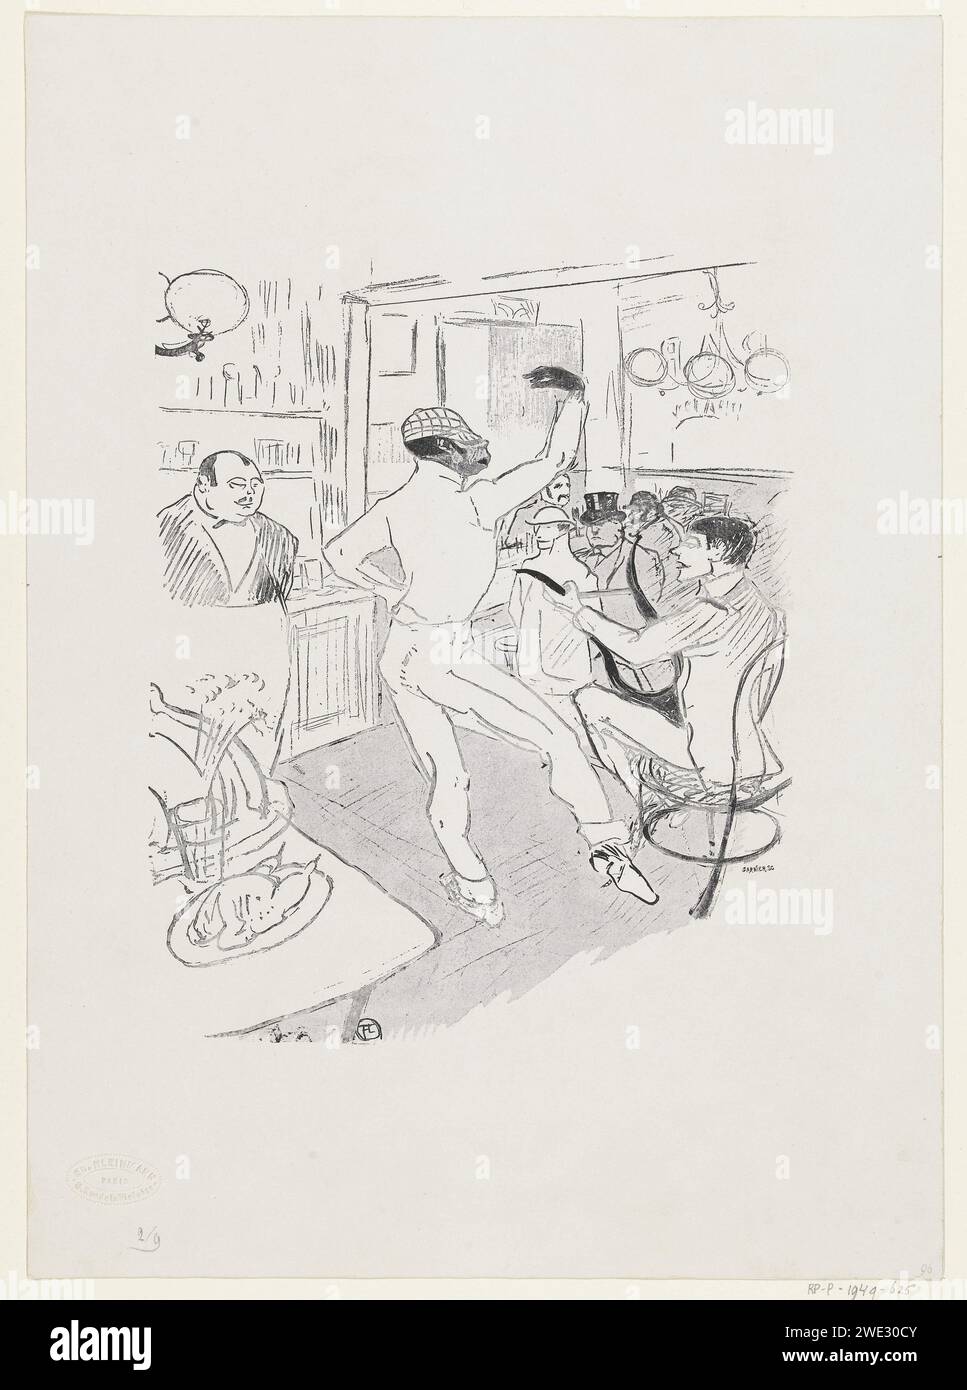 Portrait of dancing black clown chocolat in English bar in Paris, Anonymous, after Henri de Toulouse-Lautrec, 1896 photograph Portrait of the Black Clown Rafael Padilla, who performed under the artist's name Chocolat, dancing in the so -called English bar (Irish and American Bar) in Paris. He is thereby musically accompanied by his partner, the George Footit clown. On the left the bartender is known as Ralph or Randolphe. Paris paper  clown. art (+ performing  music) Paris Stock Photo